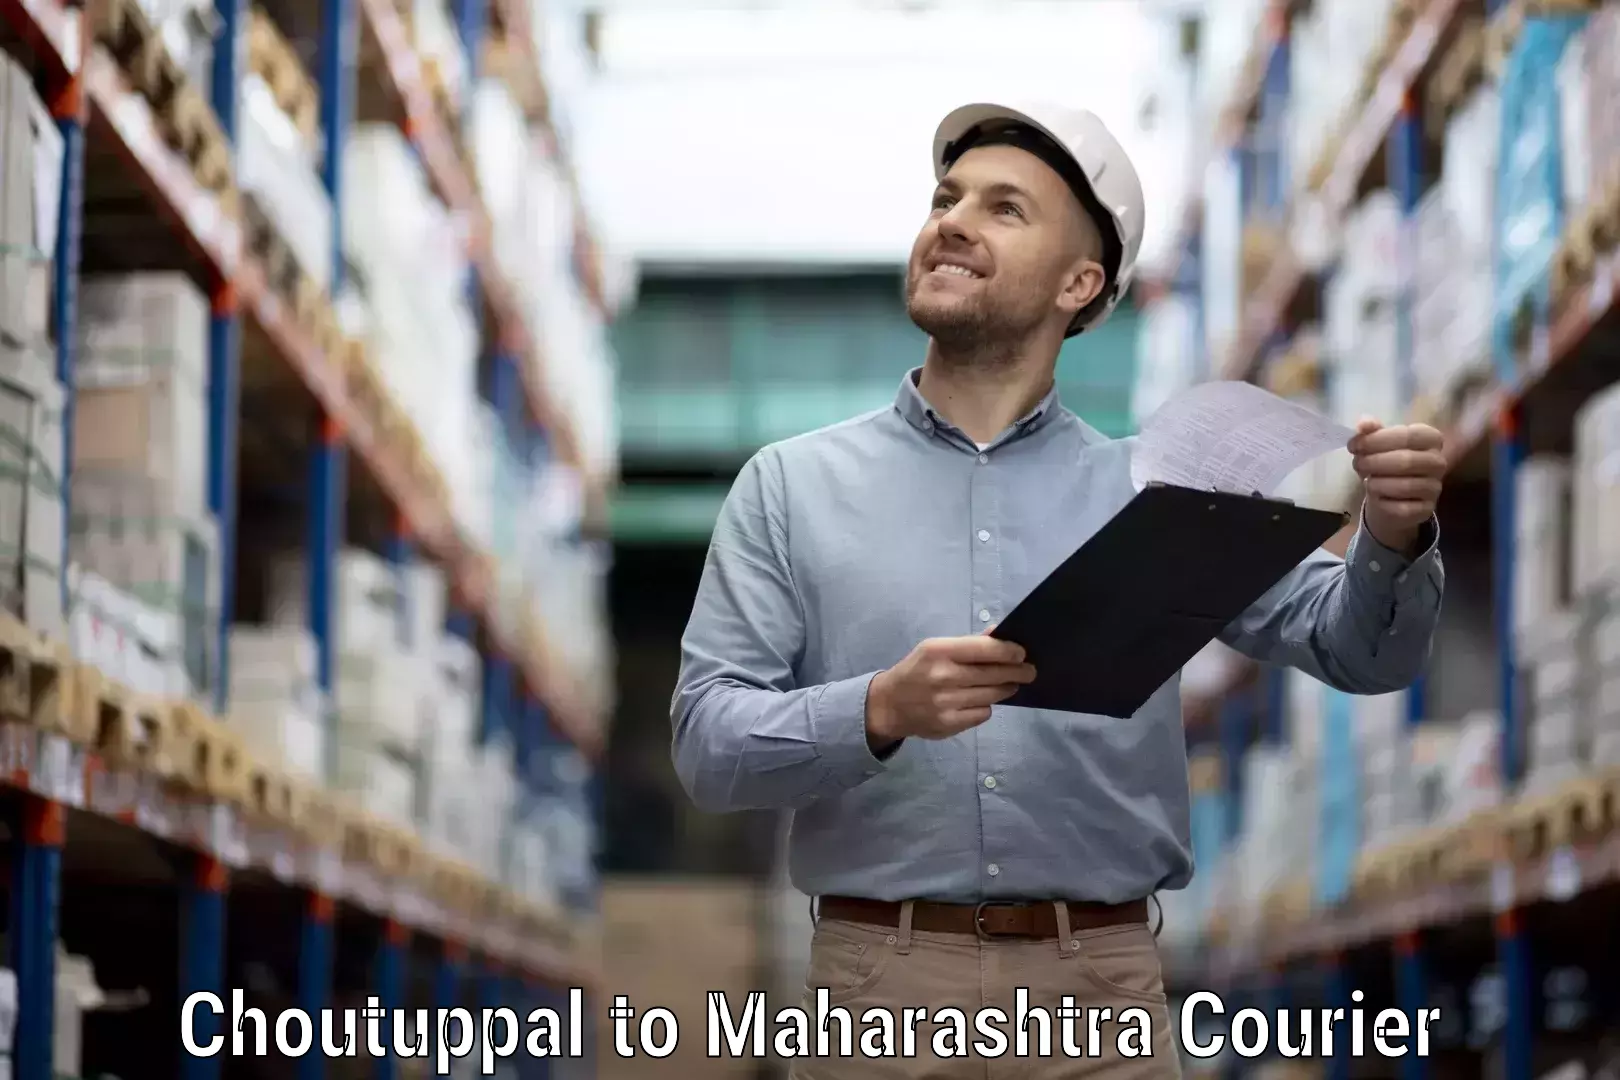 Subscription-based courier Choutuppal to Nagpur